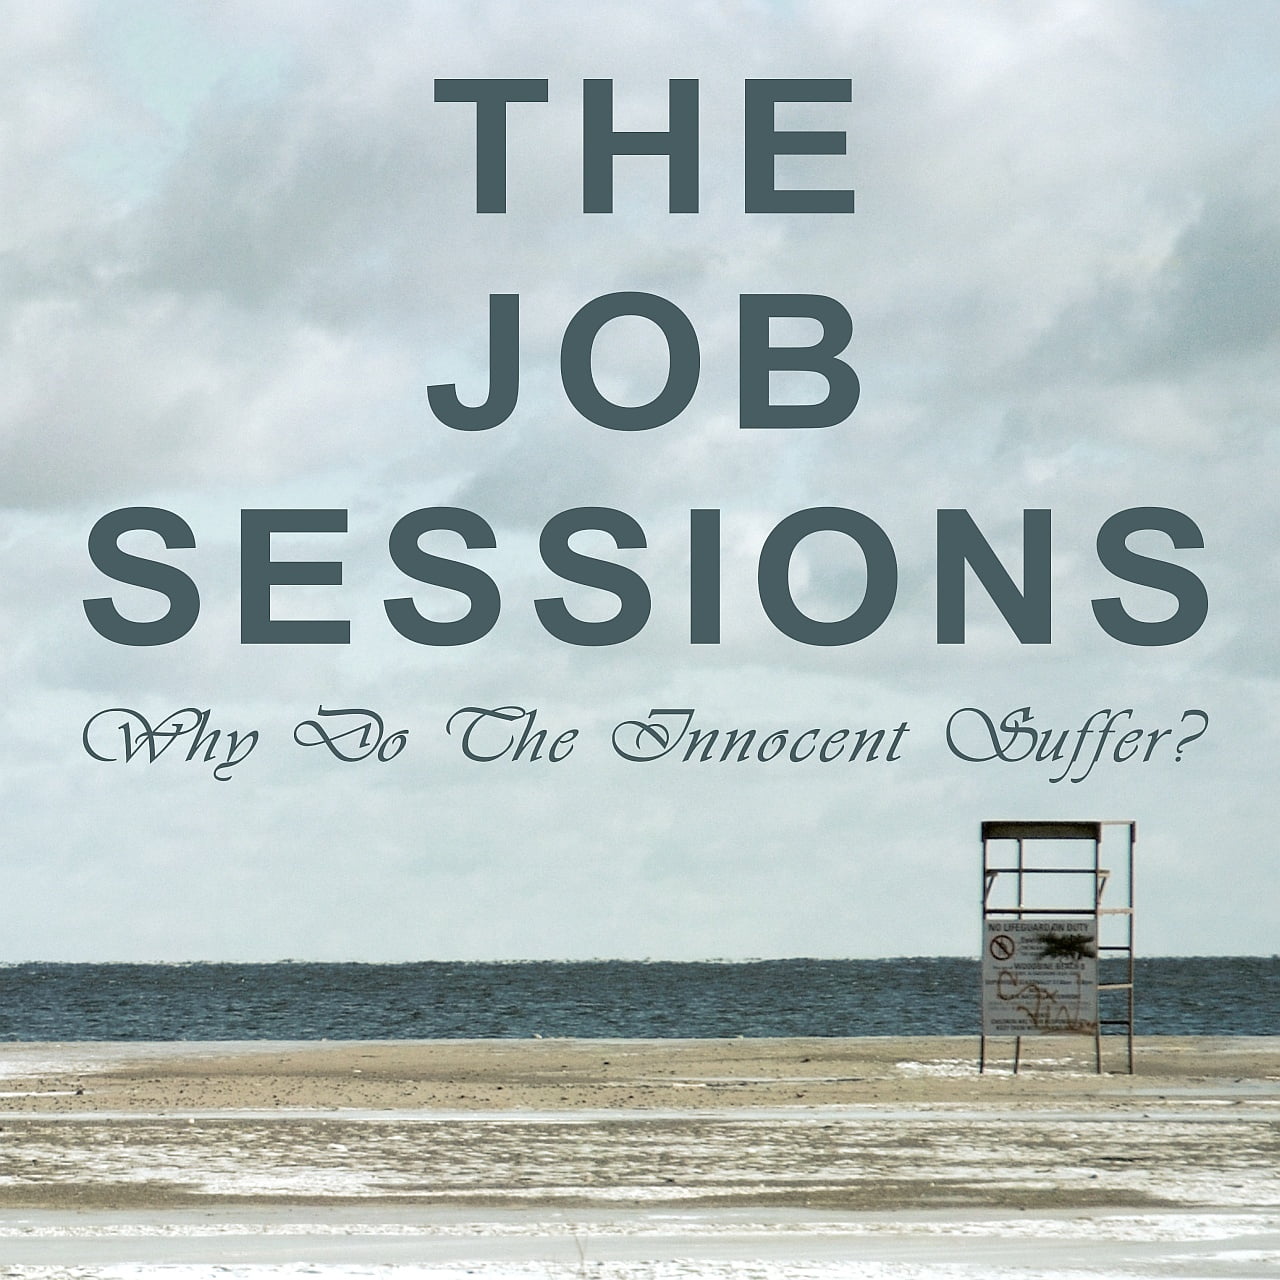 The Job Sessions Book of Job title in blue against a background of a winter beach cloudy blue sky. and an empty lifeguard chair near the lake edge. Lake looks like a line of dark grey blue between beach and sky.. Square crop.